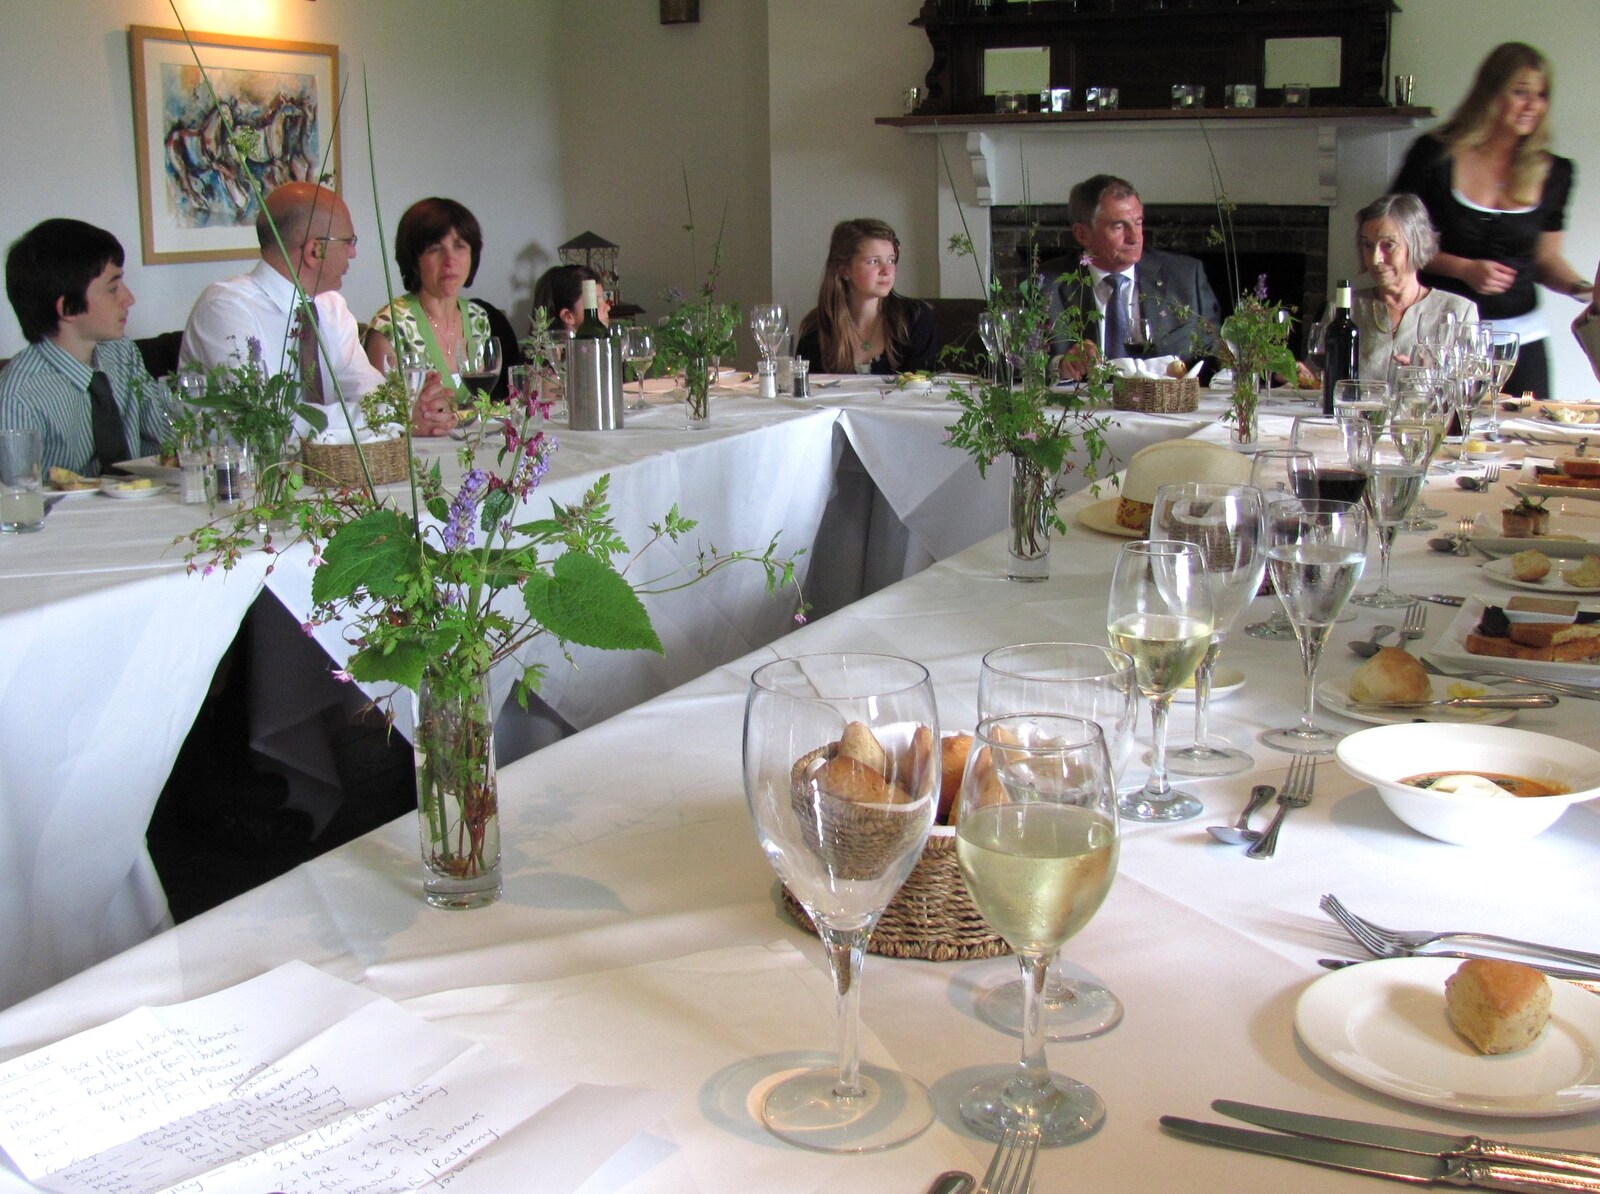 The lunch room from Mike's Memorial, Prince Hall Hotel, Two Bridges, Dartmoor - 12th July 2011